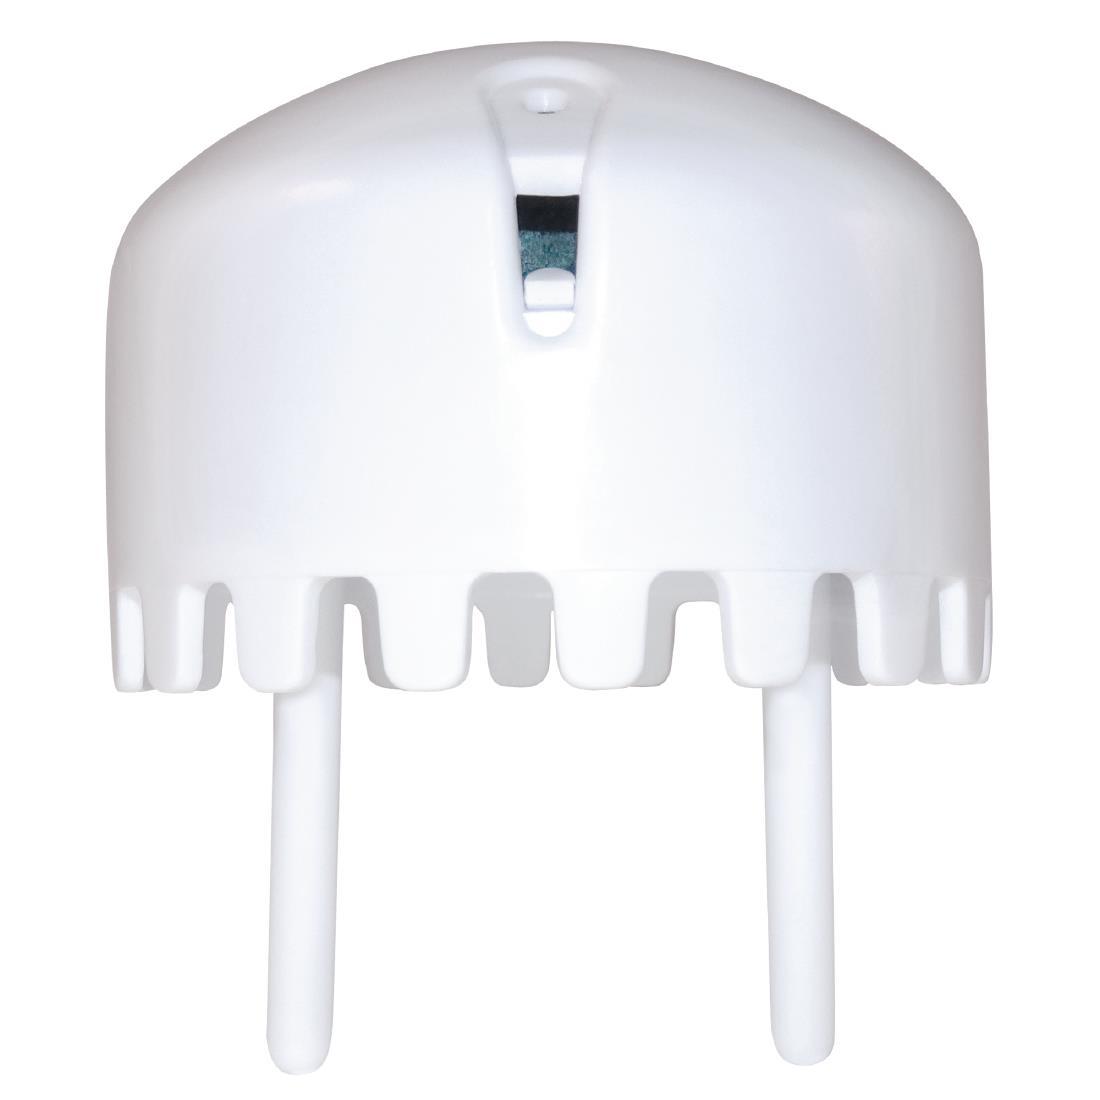 Eco Cap Type 1 Two-Prong Urinal Caps (4 Pack) - DC217  - 1